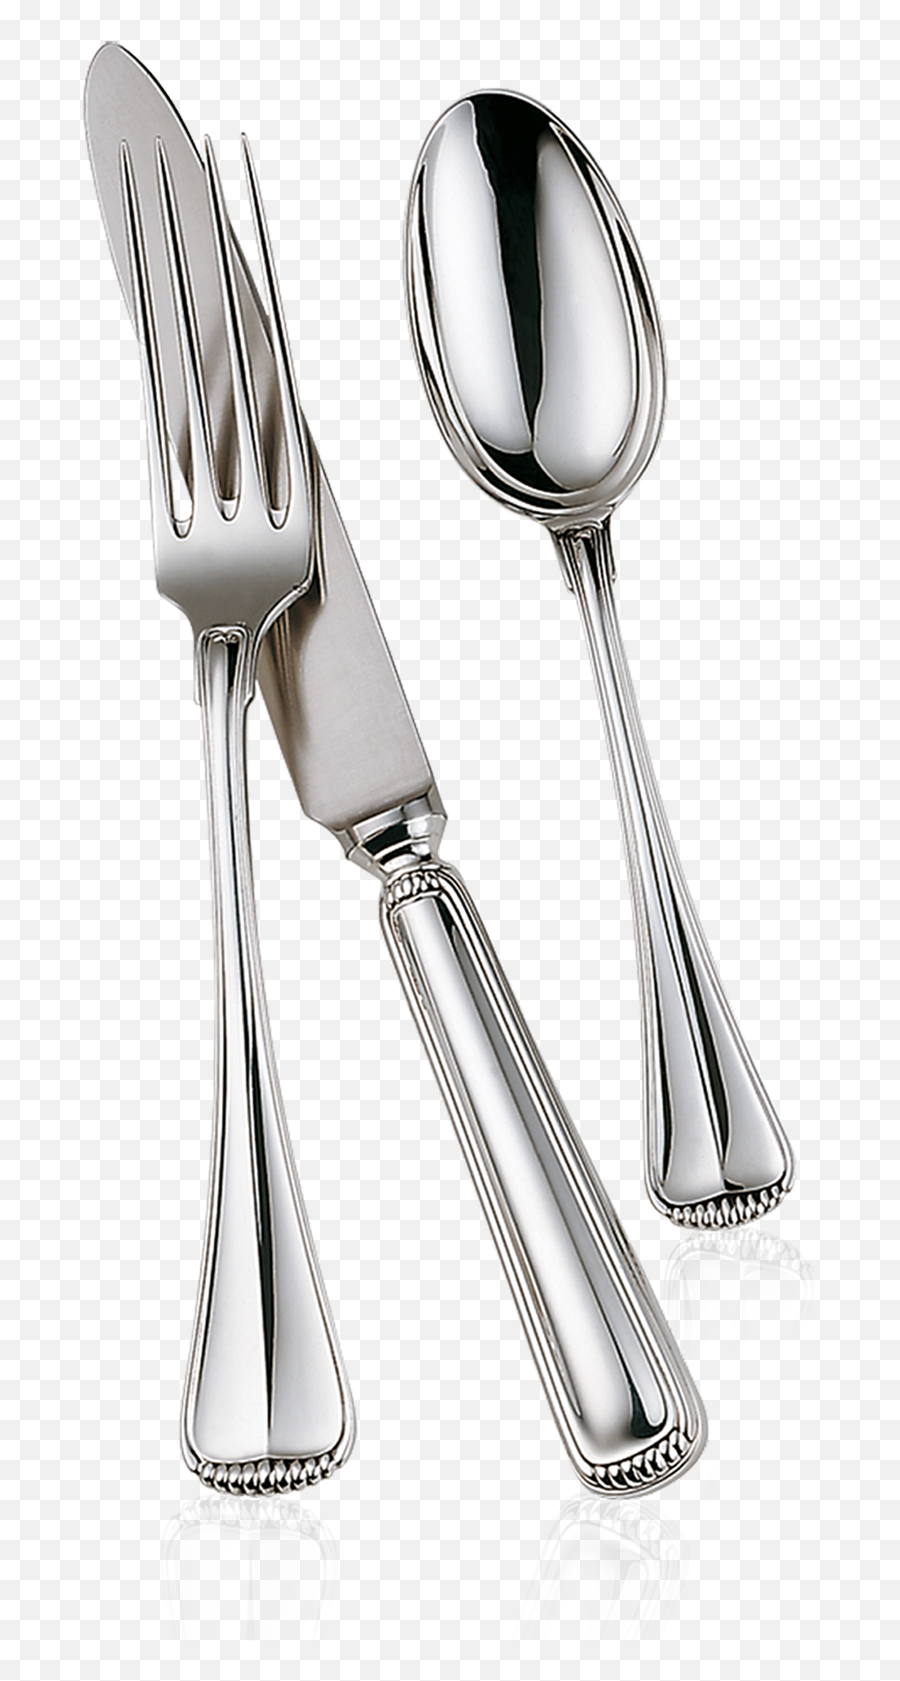 Place Setting Png - Knife,Place Setting Png